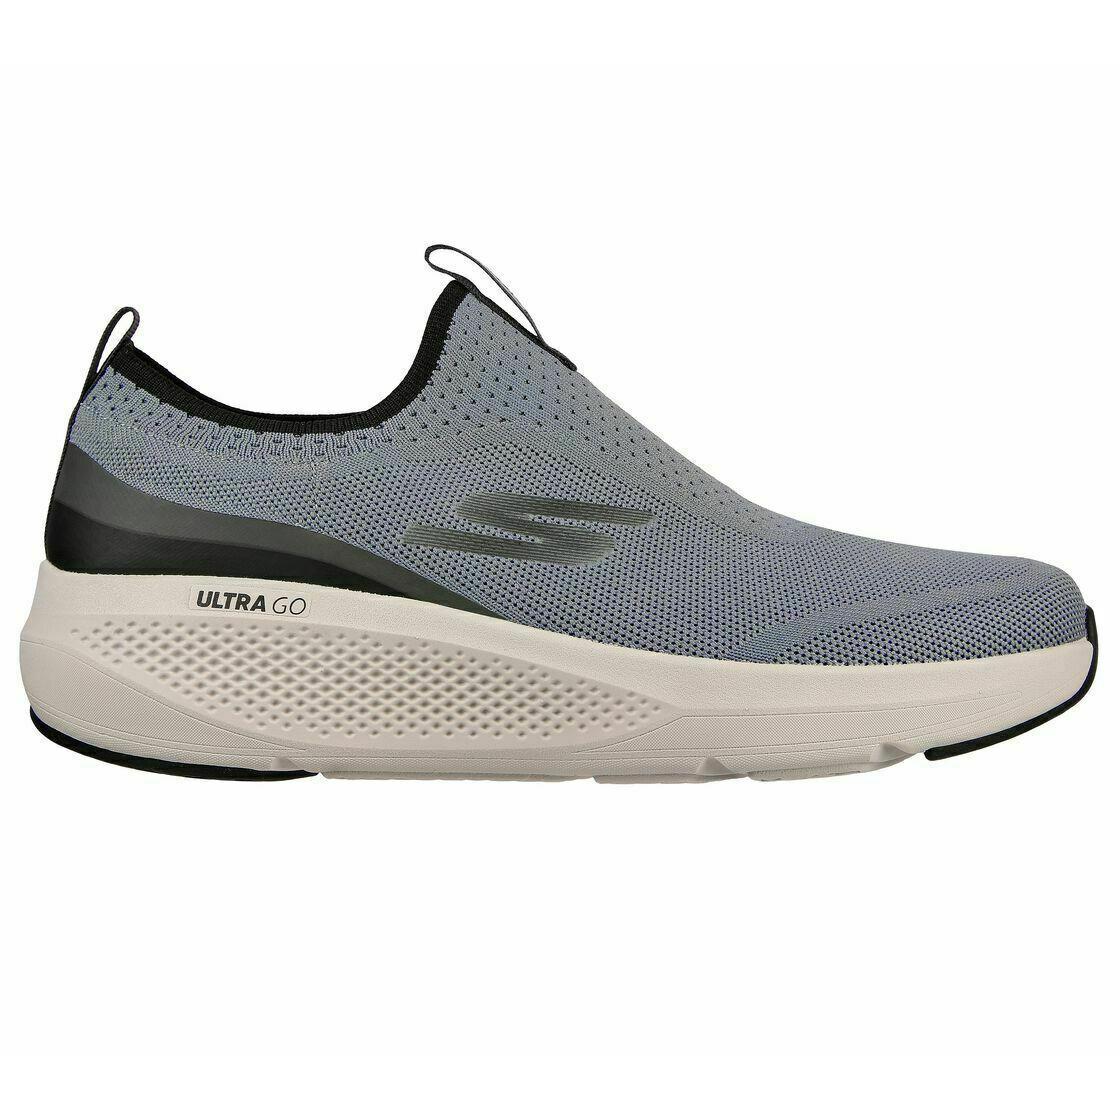 Skechers shoes  - Gray / White 3